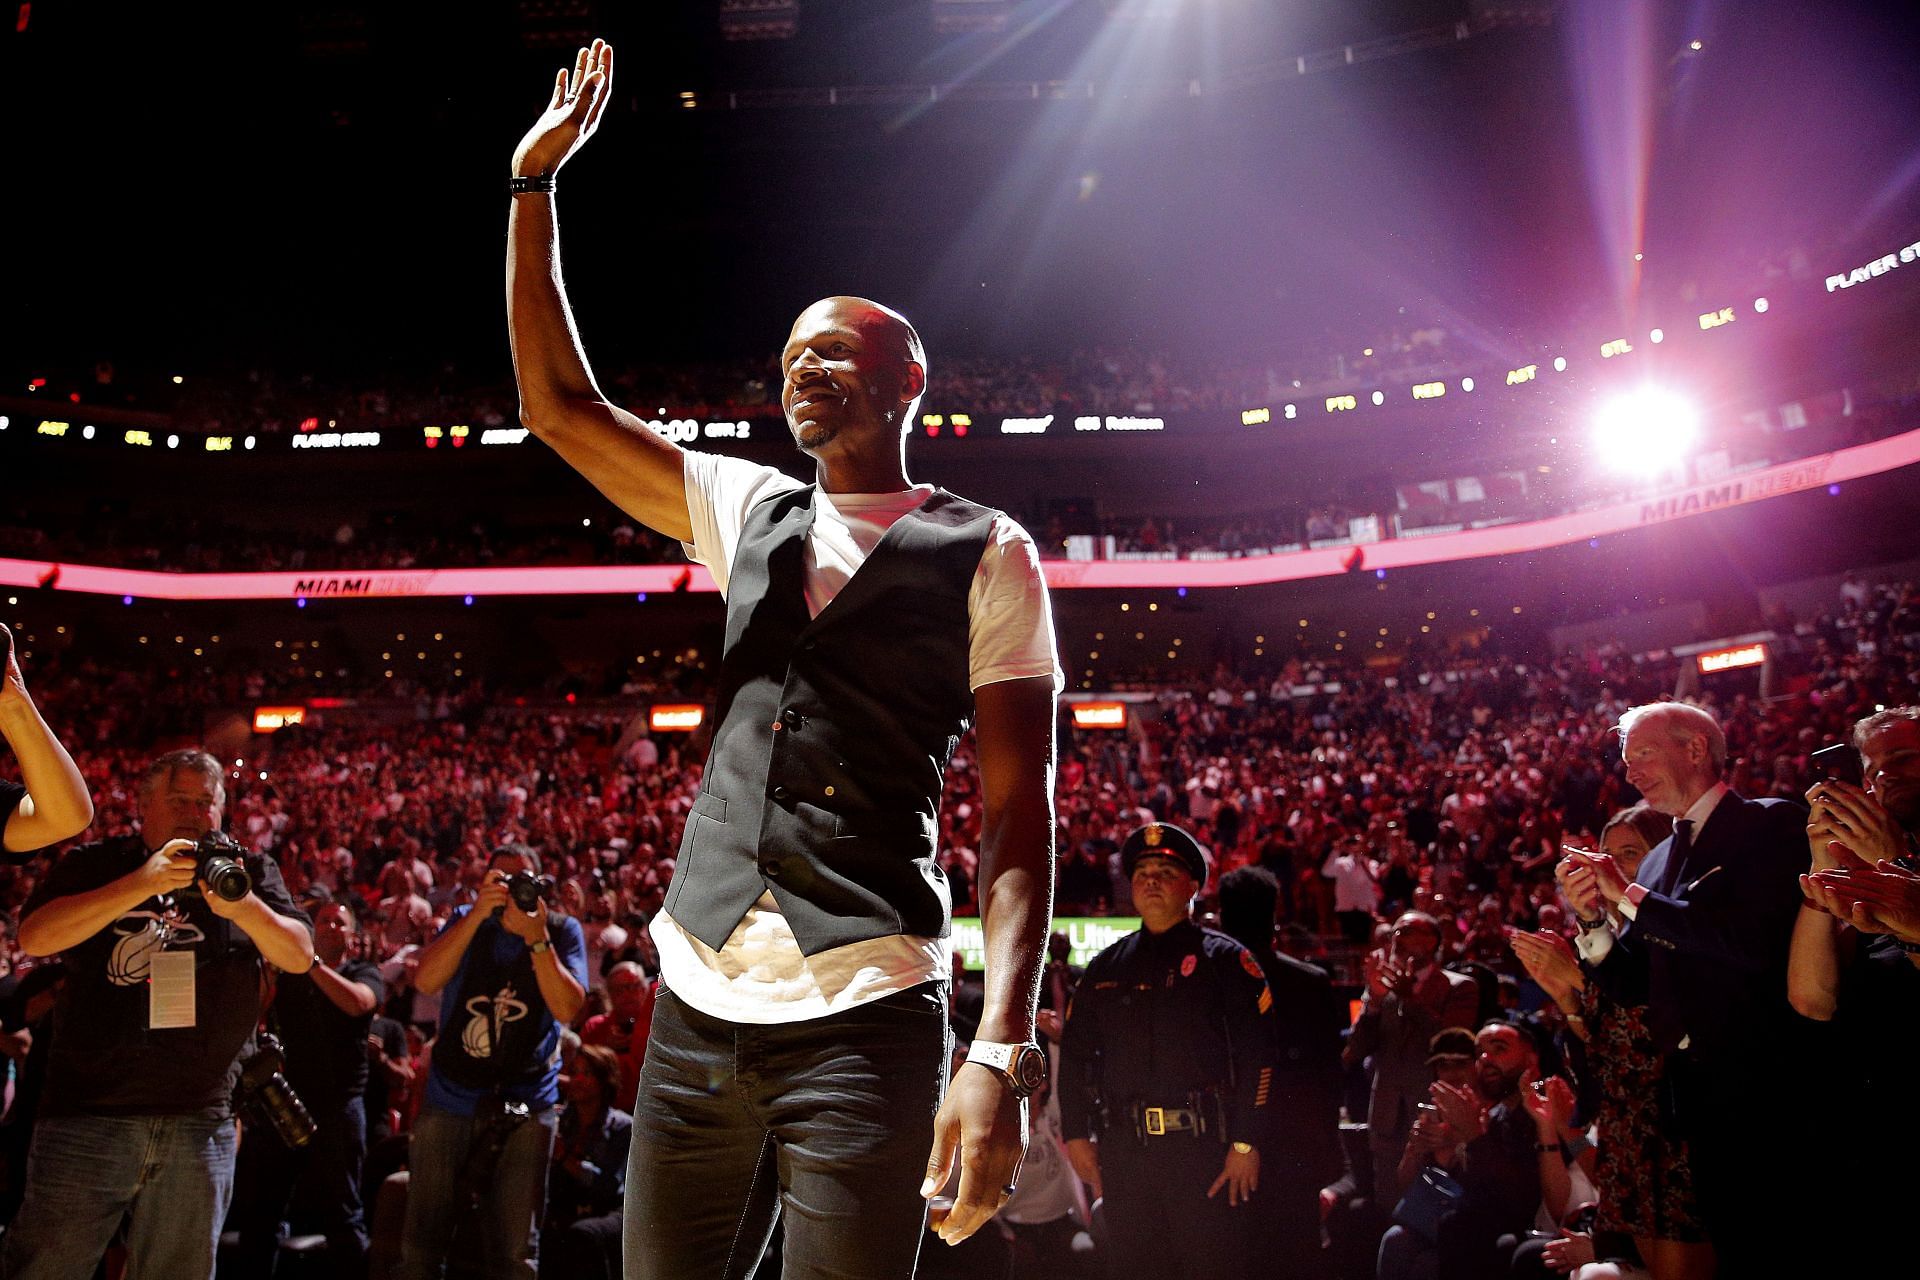 Former Miami Heat player Ray Allen is recognized during the first half between the Miami Heat and the Memphis Grizzlies at American Airlines Arena on Oct. 23, 2019, in Miami, Florida.